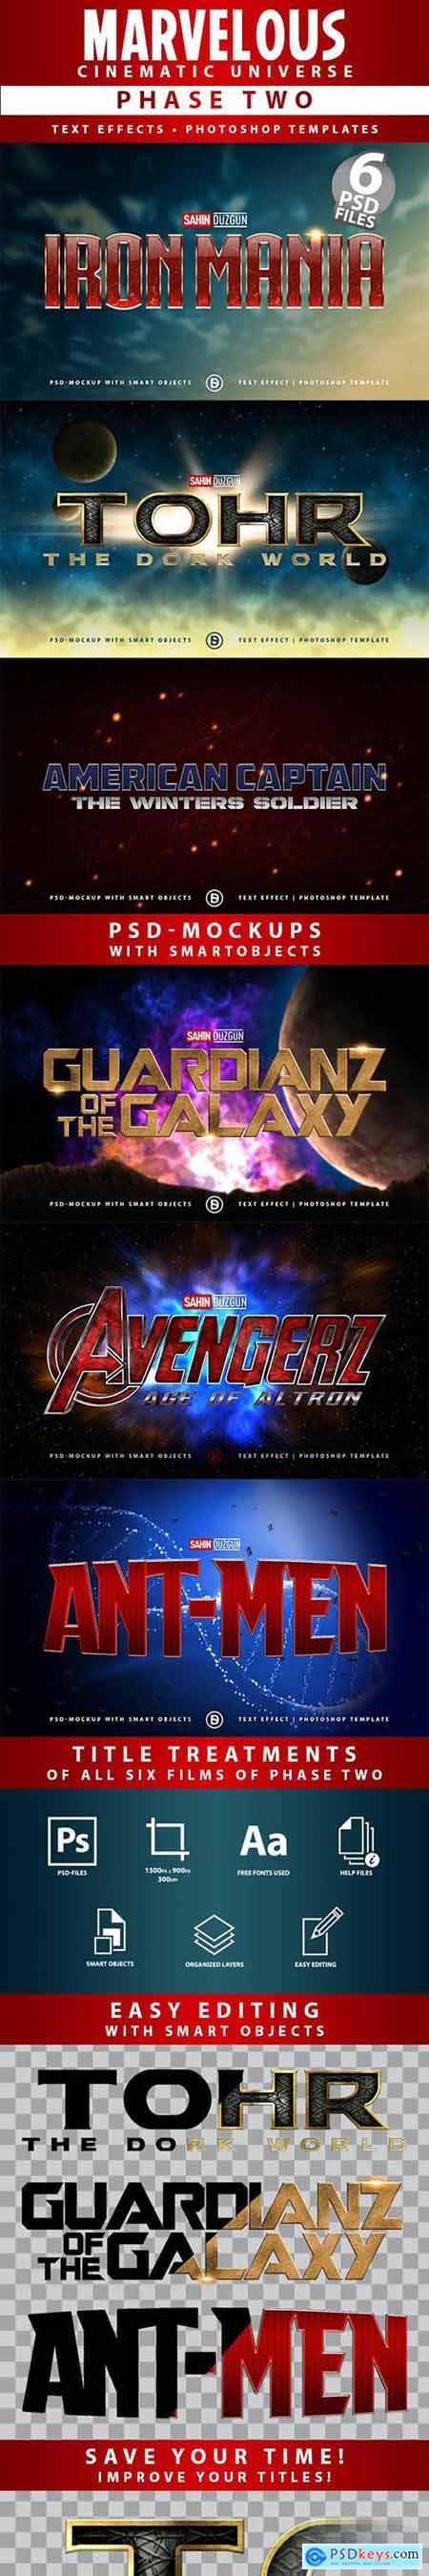 Marvelous Cinematic Universe - Phase Two 26501533